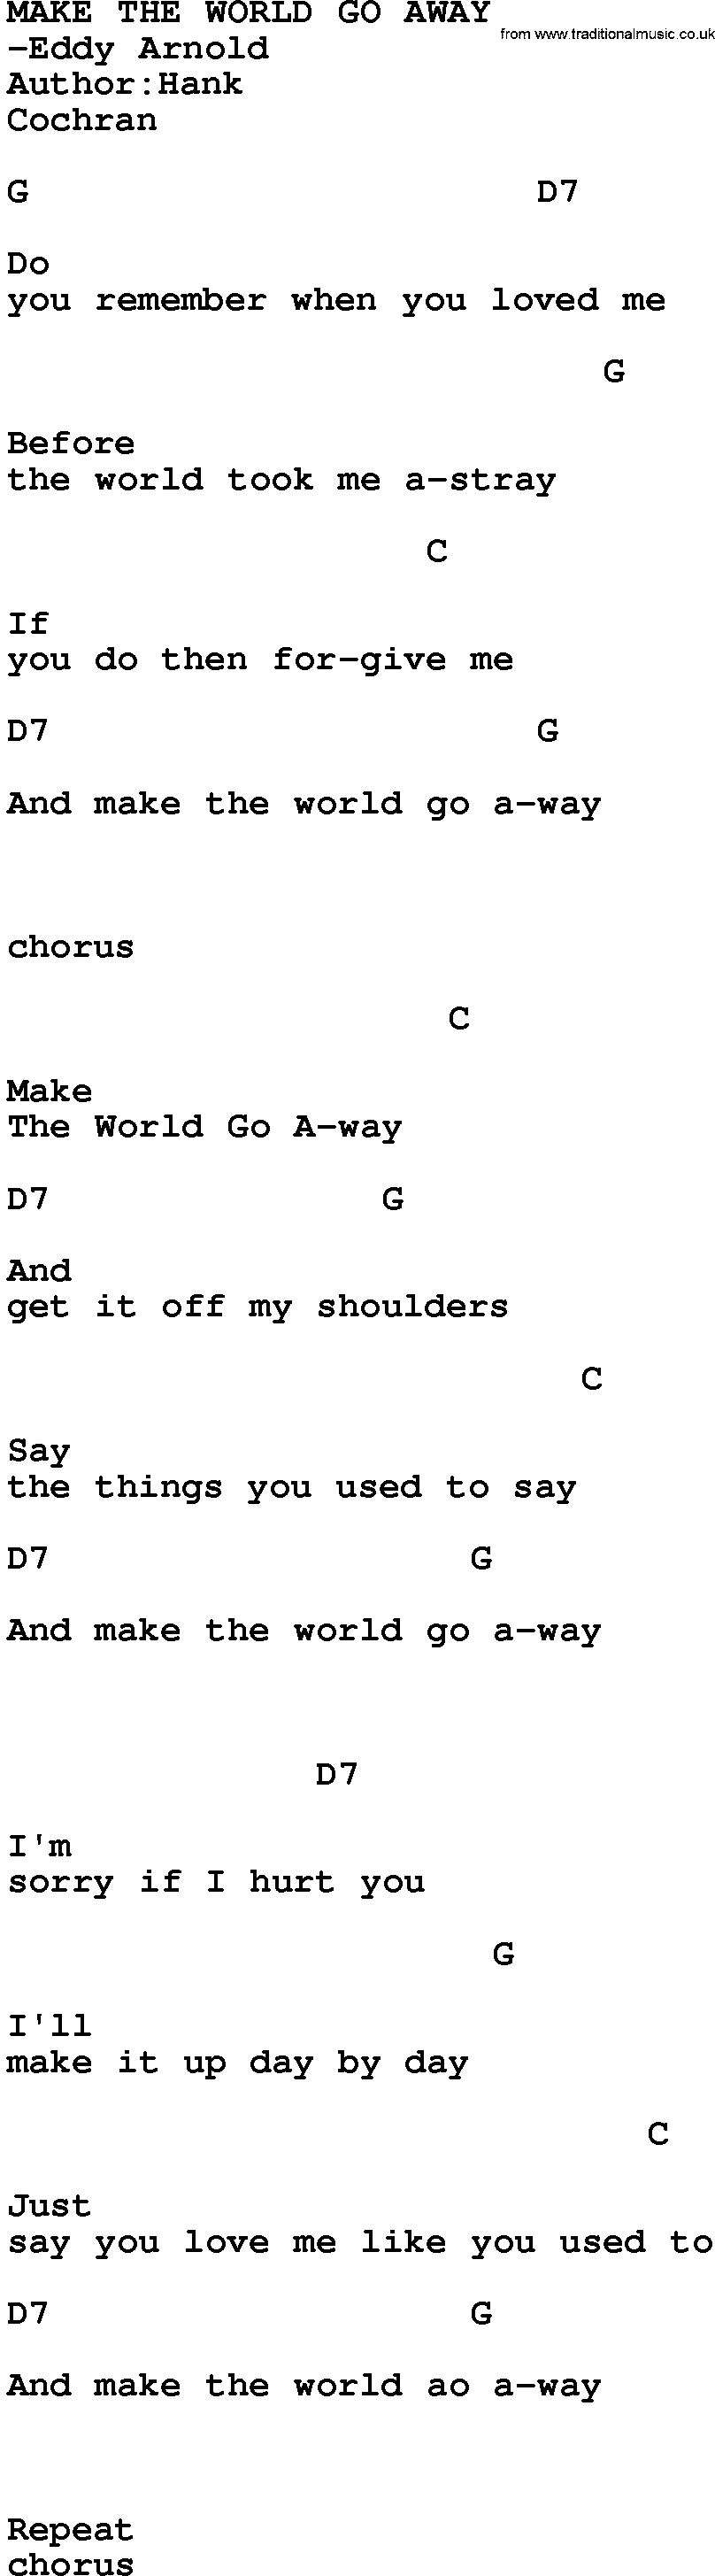 Country music song: Make The World Go Away lyrics and chords